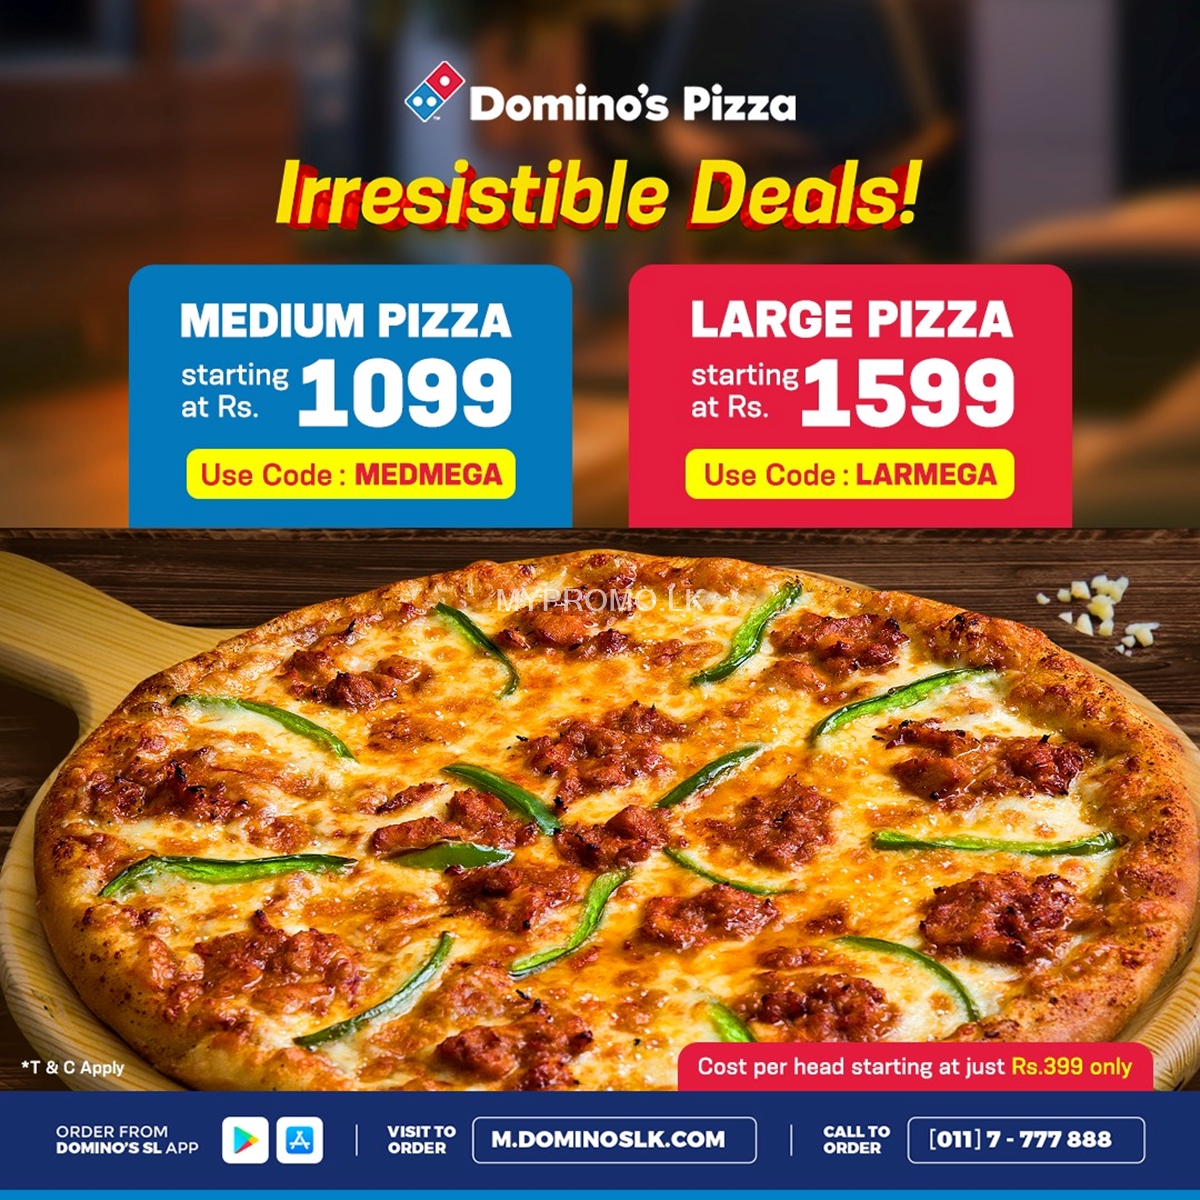 Incredible offer from Domino's Pizza!